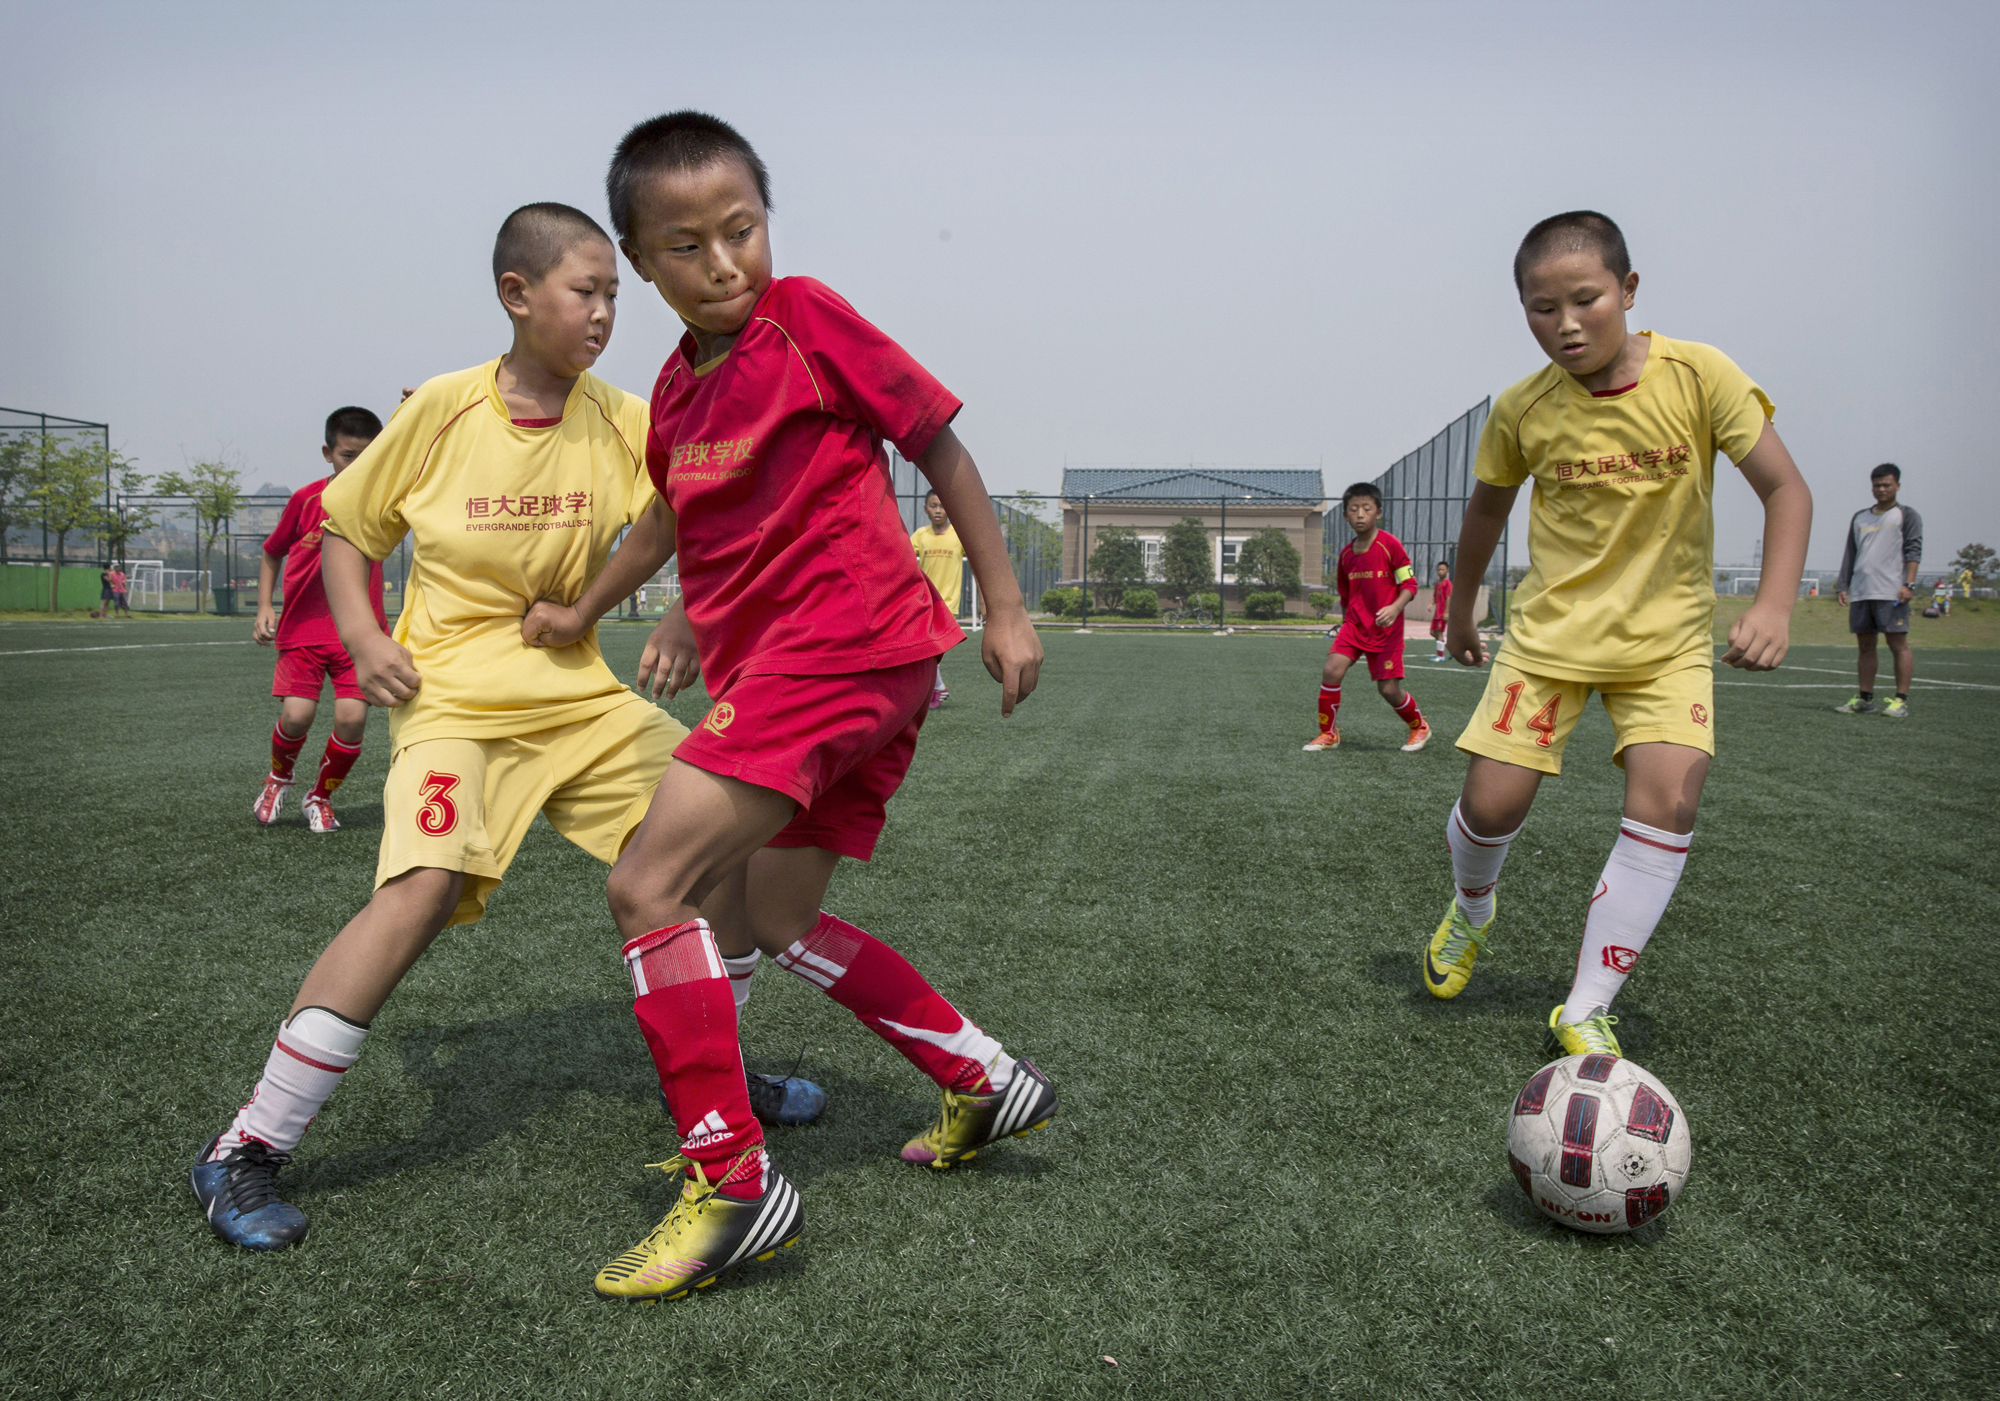 A match on a practice pitch at the Evergrande International Football School on June 14.